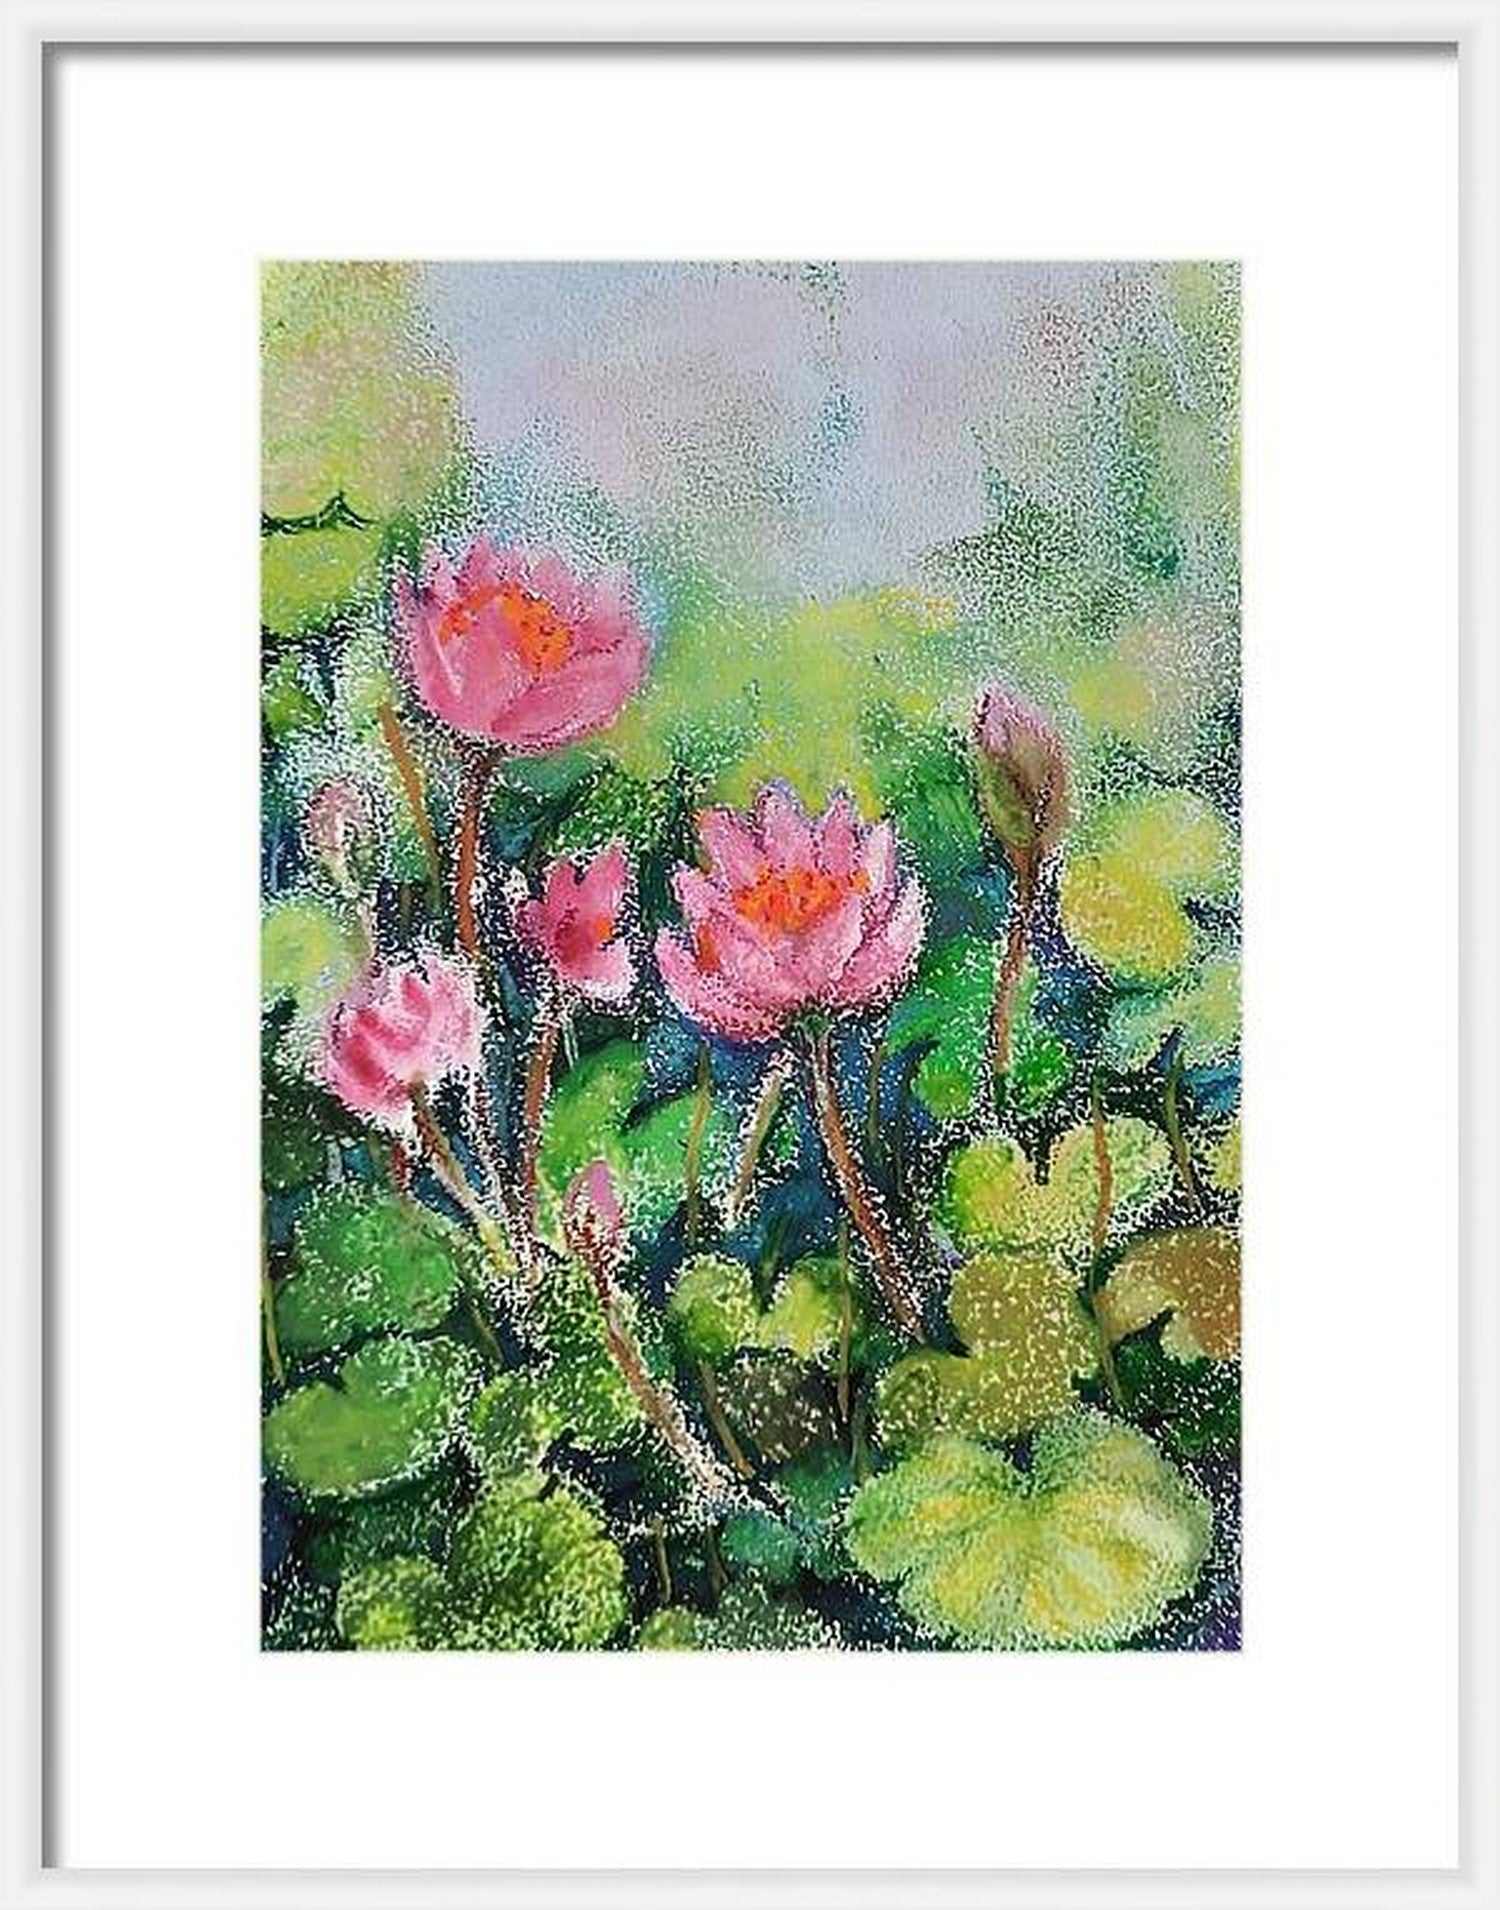 Virtual frame, Lotus flowers in a Pond, mixed media artwork